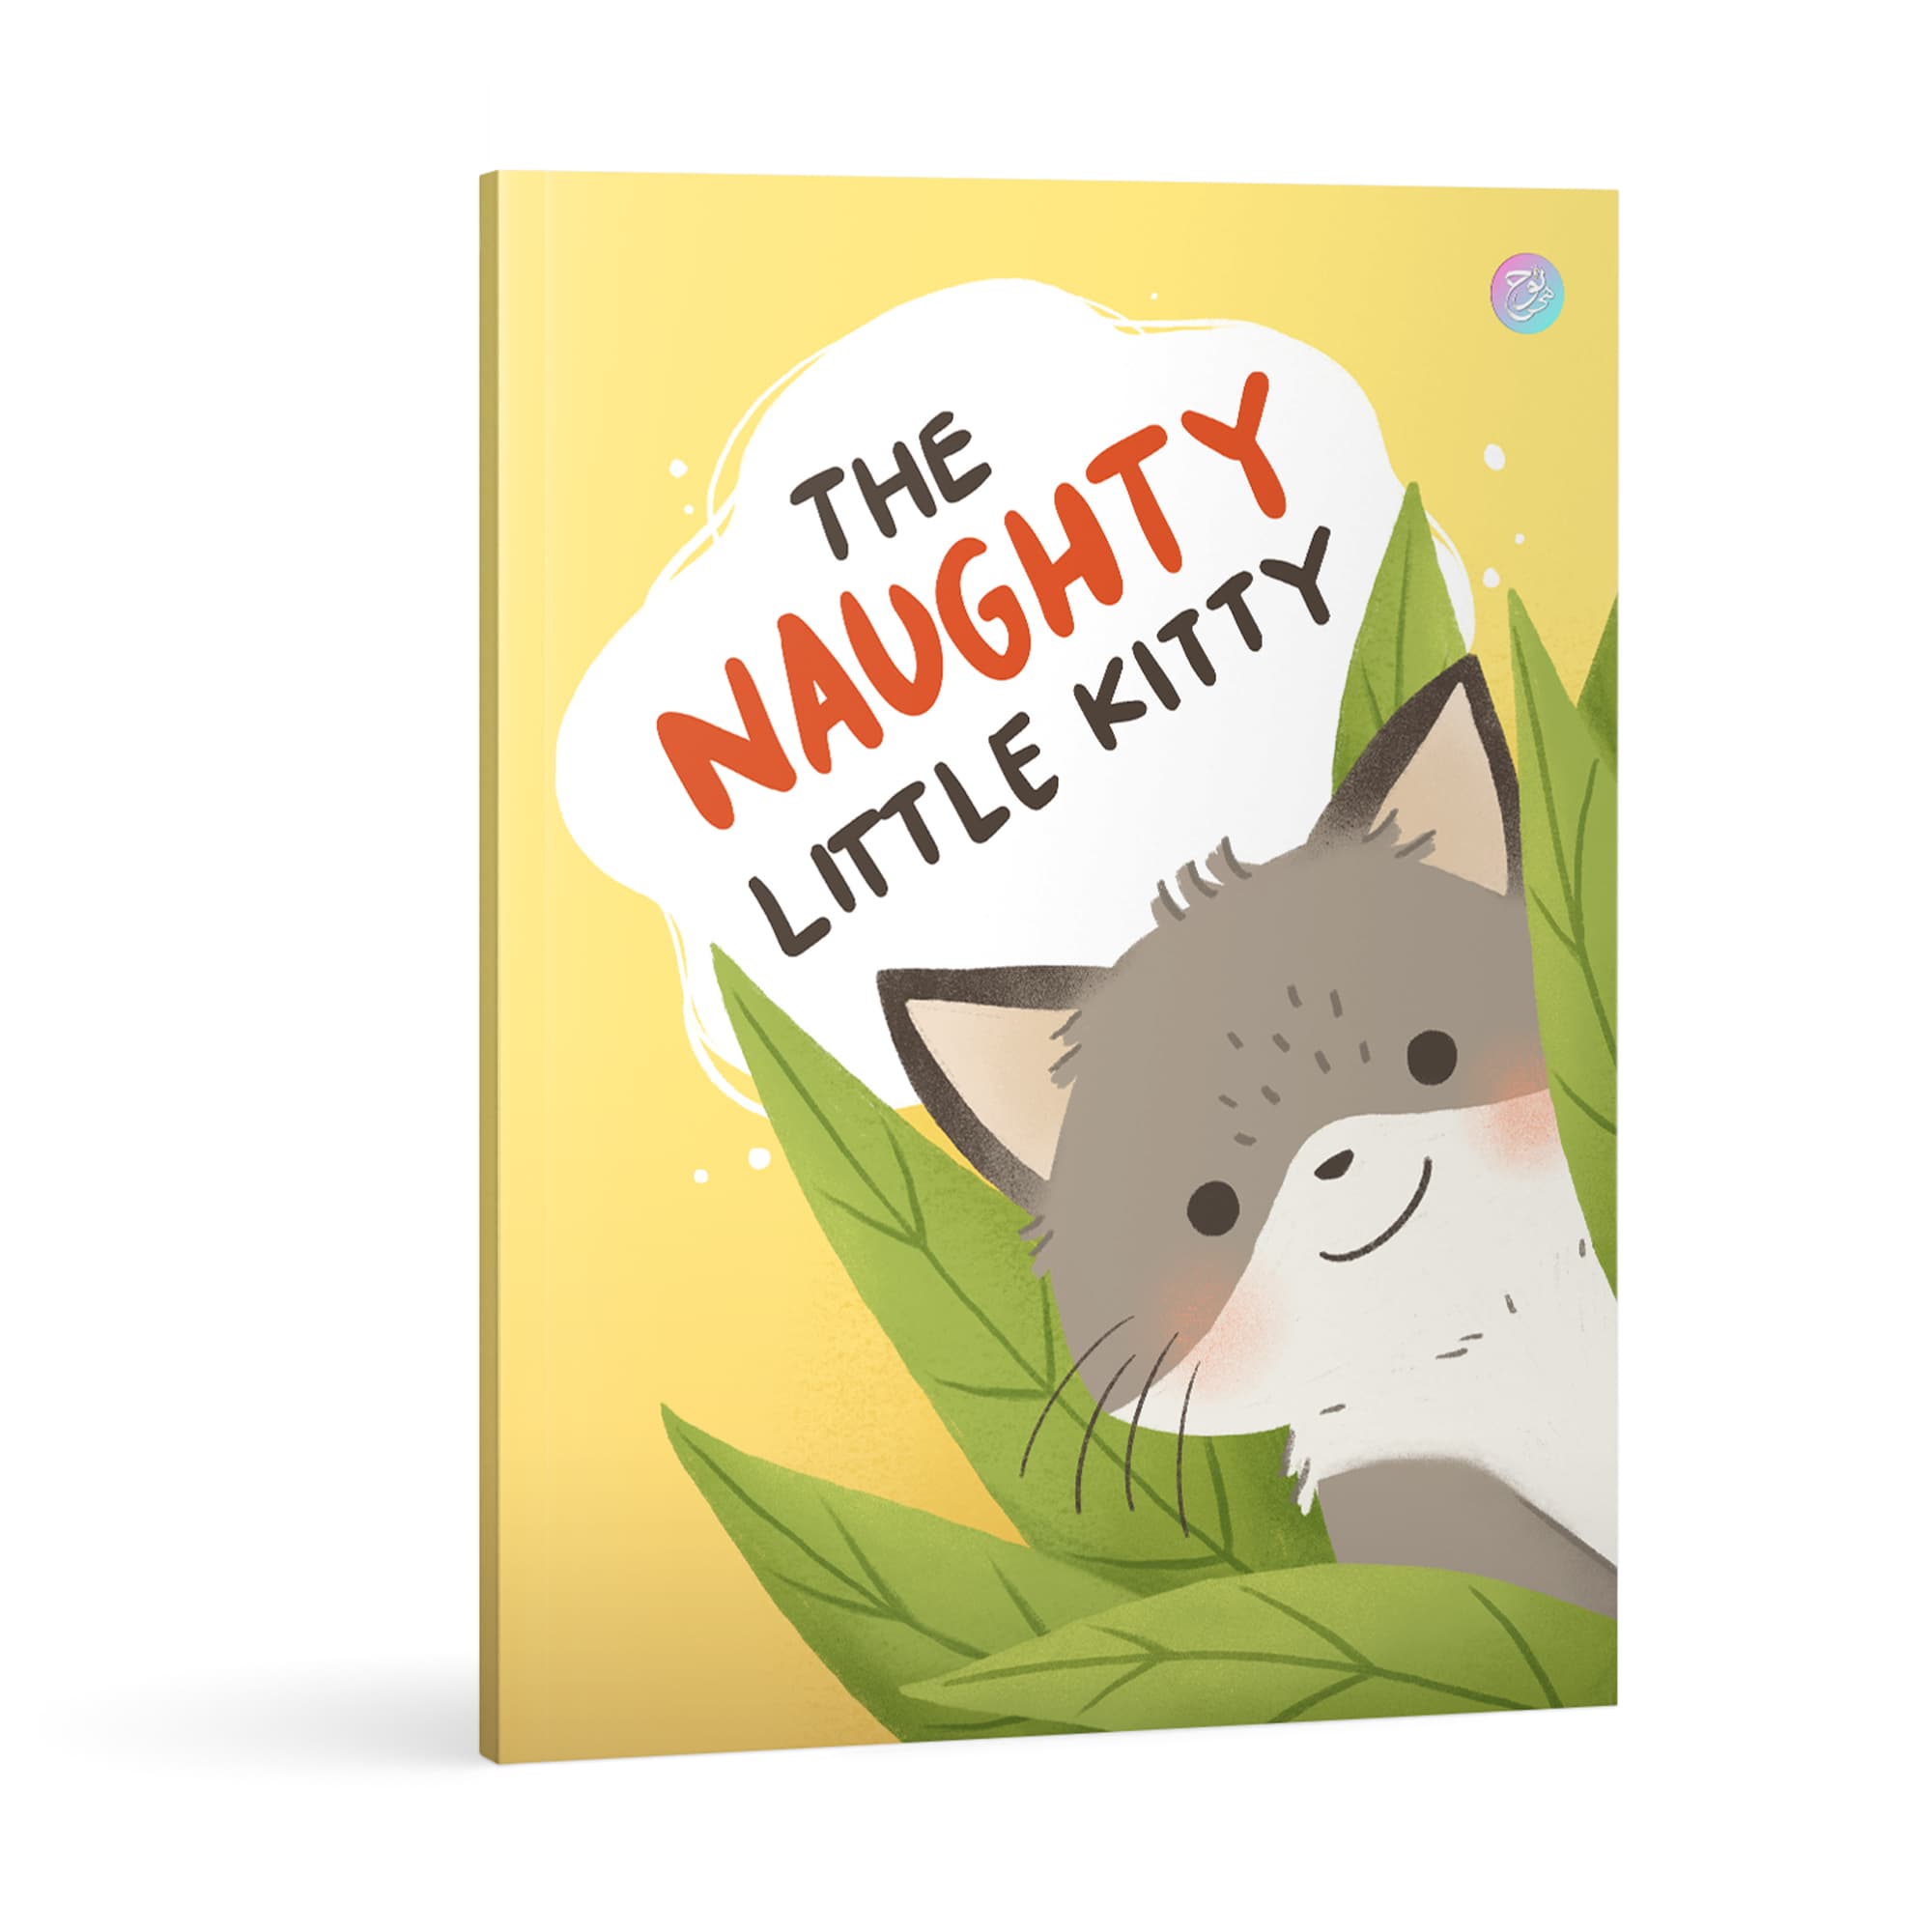 The Naughty Little Kitty by Ria Said